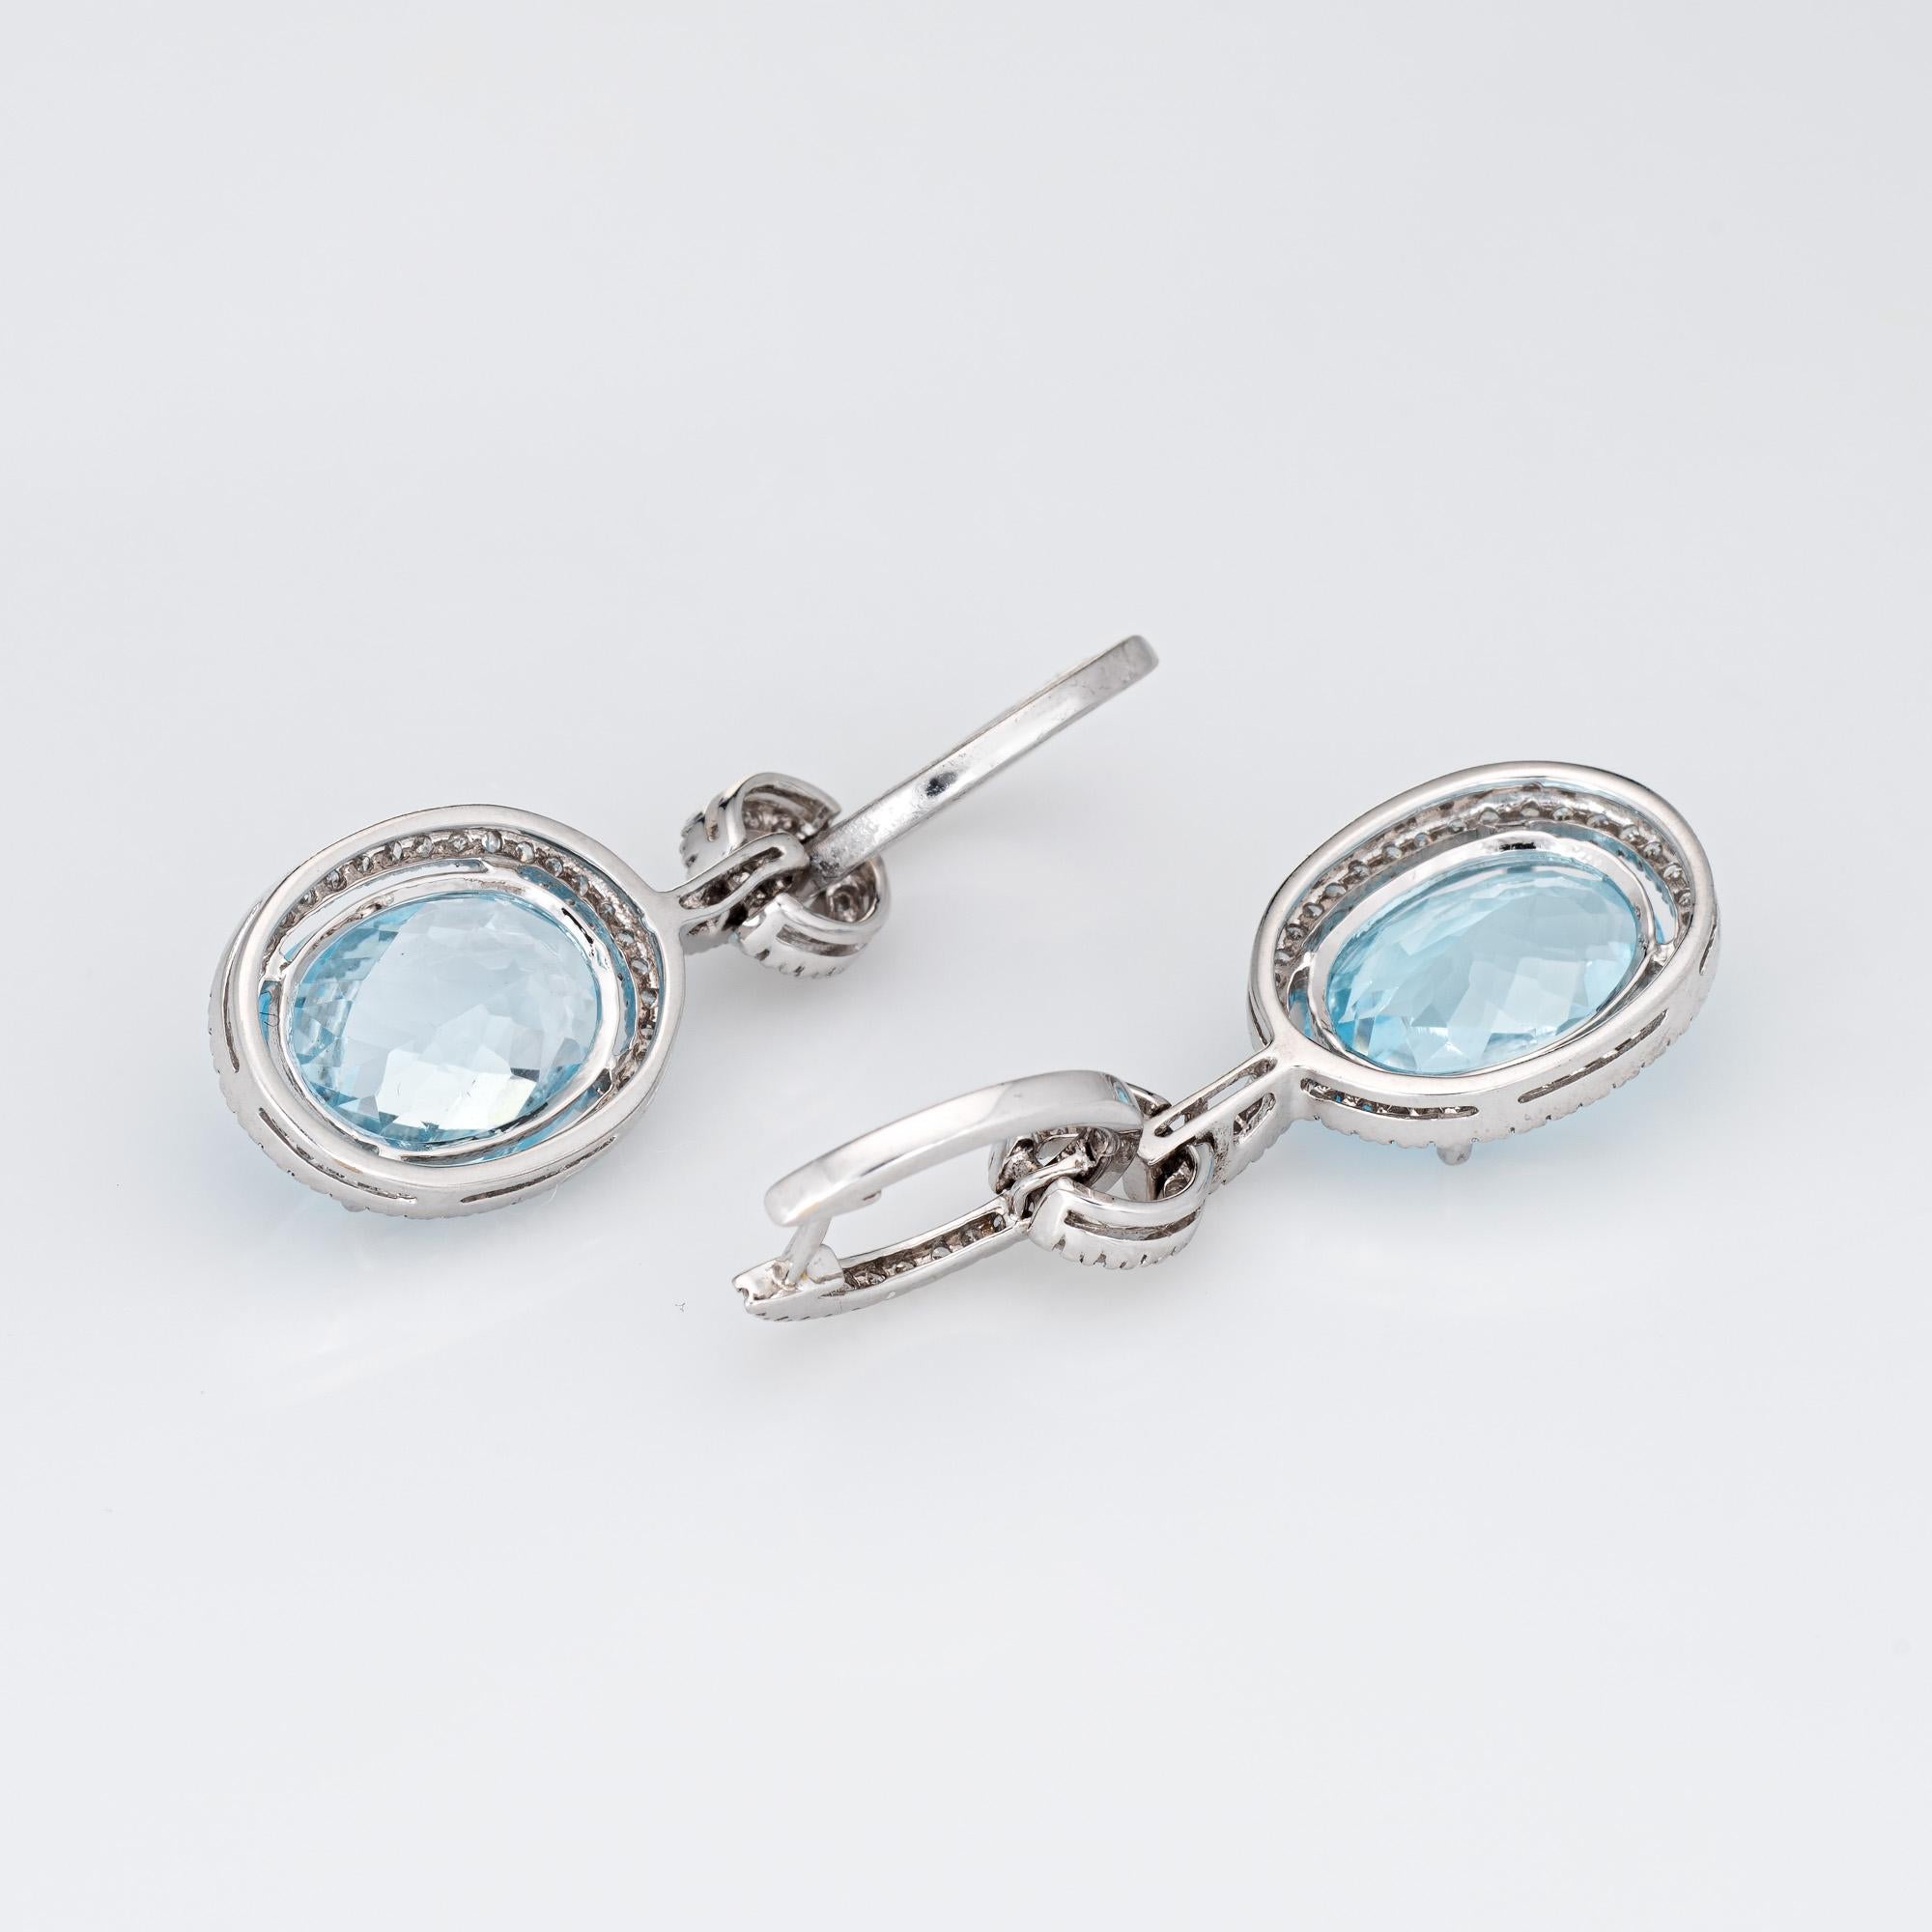 Elegant pair of blue topaz & diamond drop earrings crafted in 14k white gold. 

Faceted oval cut blue topaz measures 14mm x 10mm (estimated at 5.50 carats each - 11 carats total estimated weight). Single cut diamonds total an estimated 0.68 carats